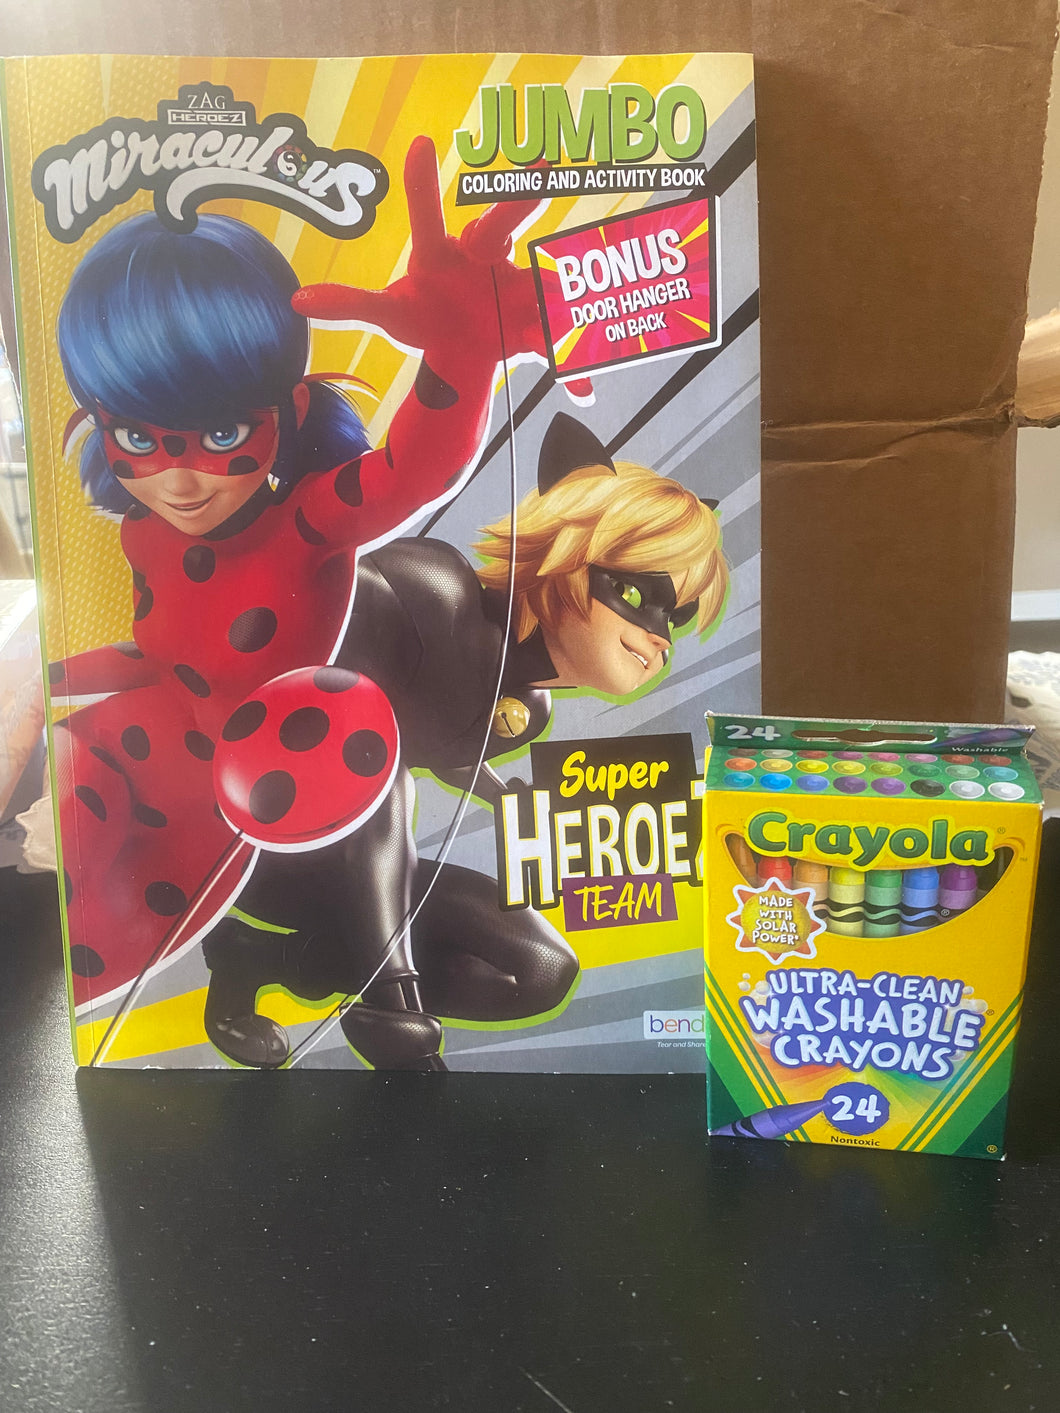 New Super Hero Coloring book and New Crayons